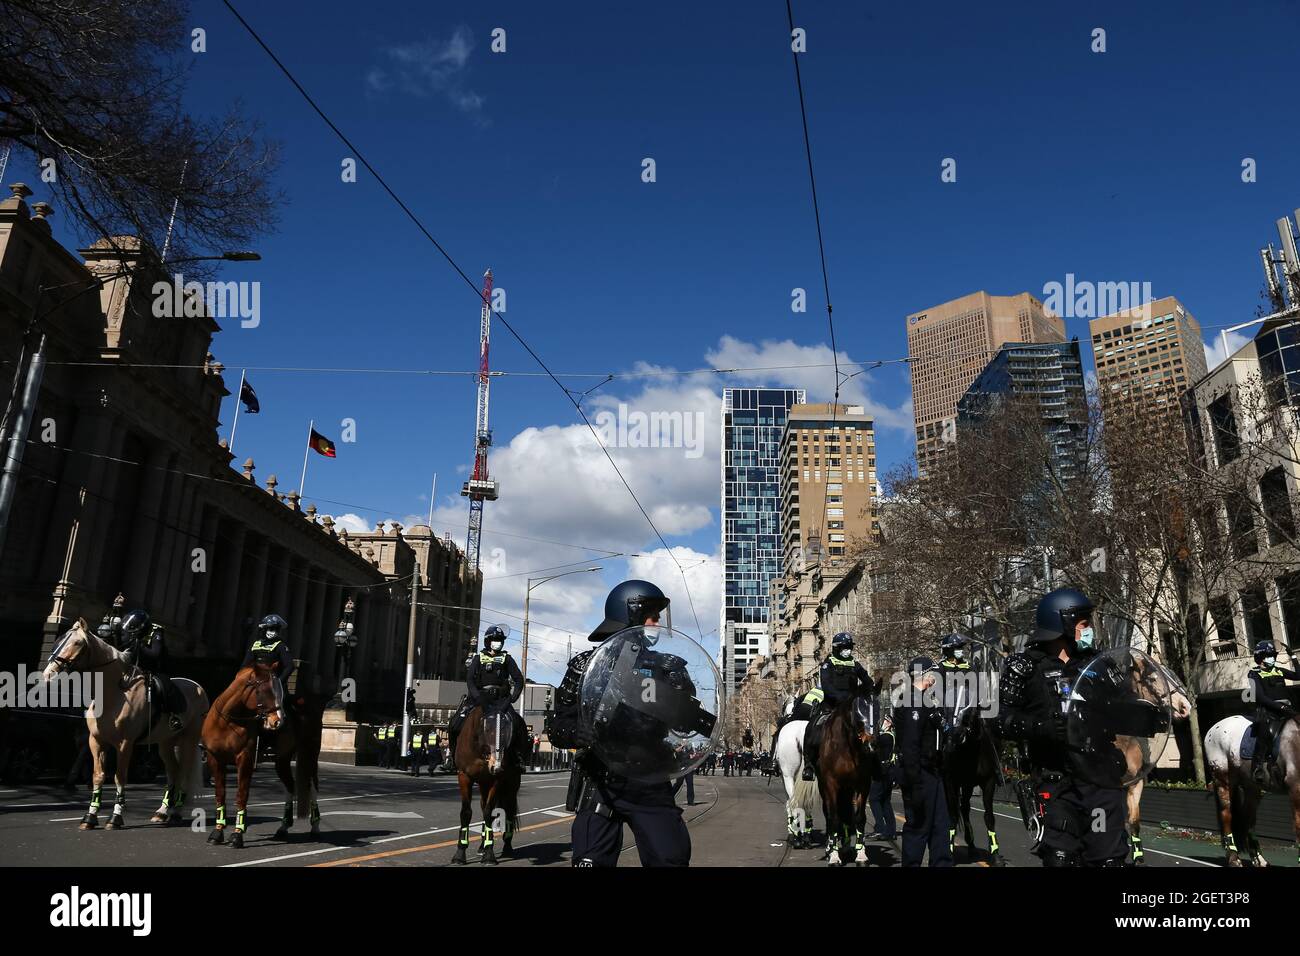 Melbourne, Australia, 21 August, 2021. Hundreds of police are seen during the Freedom protest on August 21, 2021 in Melbourne, Australia. Freedom protests are being held around the country in response to the governments COVID-19 restrictions and continuing removal of liberties.  Credit: Dave Hewison/Speed Media/Alamy Live News Stock Photo